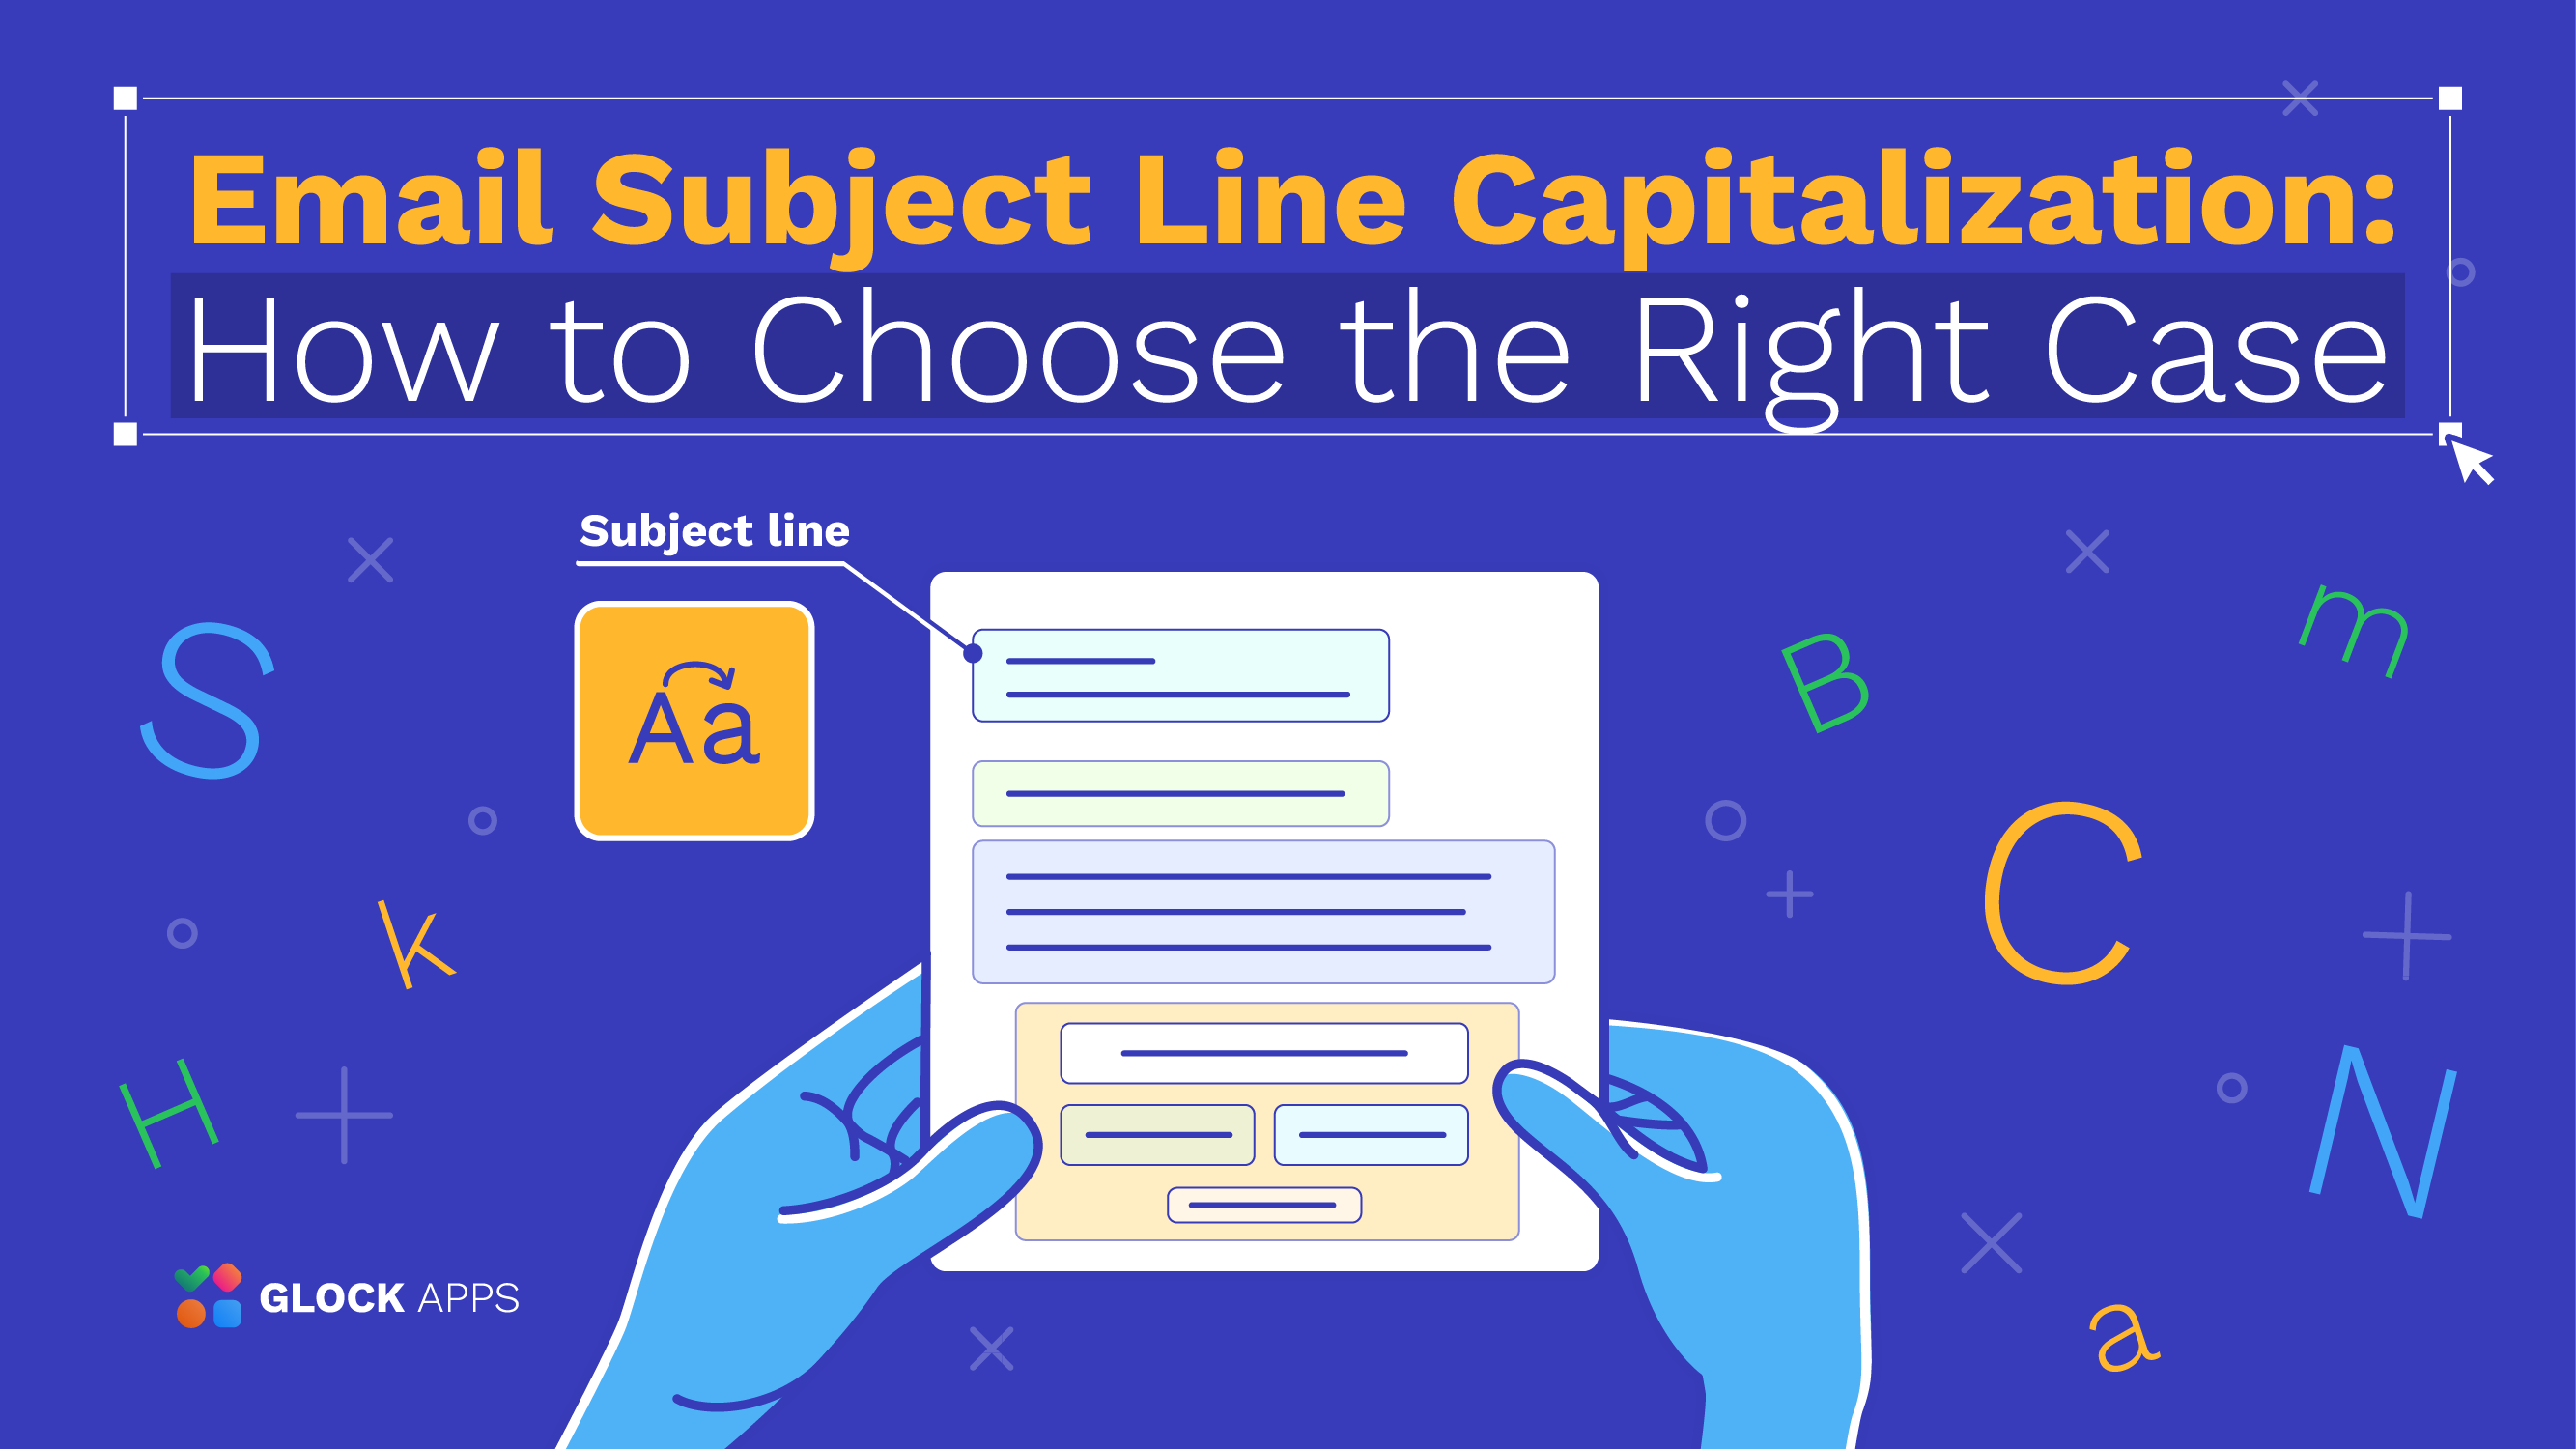 glockapps:-email-subject-line-capitalization:-how-to-choose-the-right-case